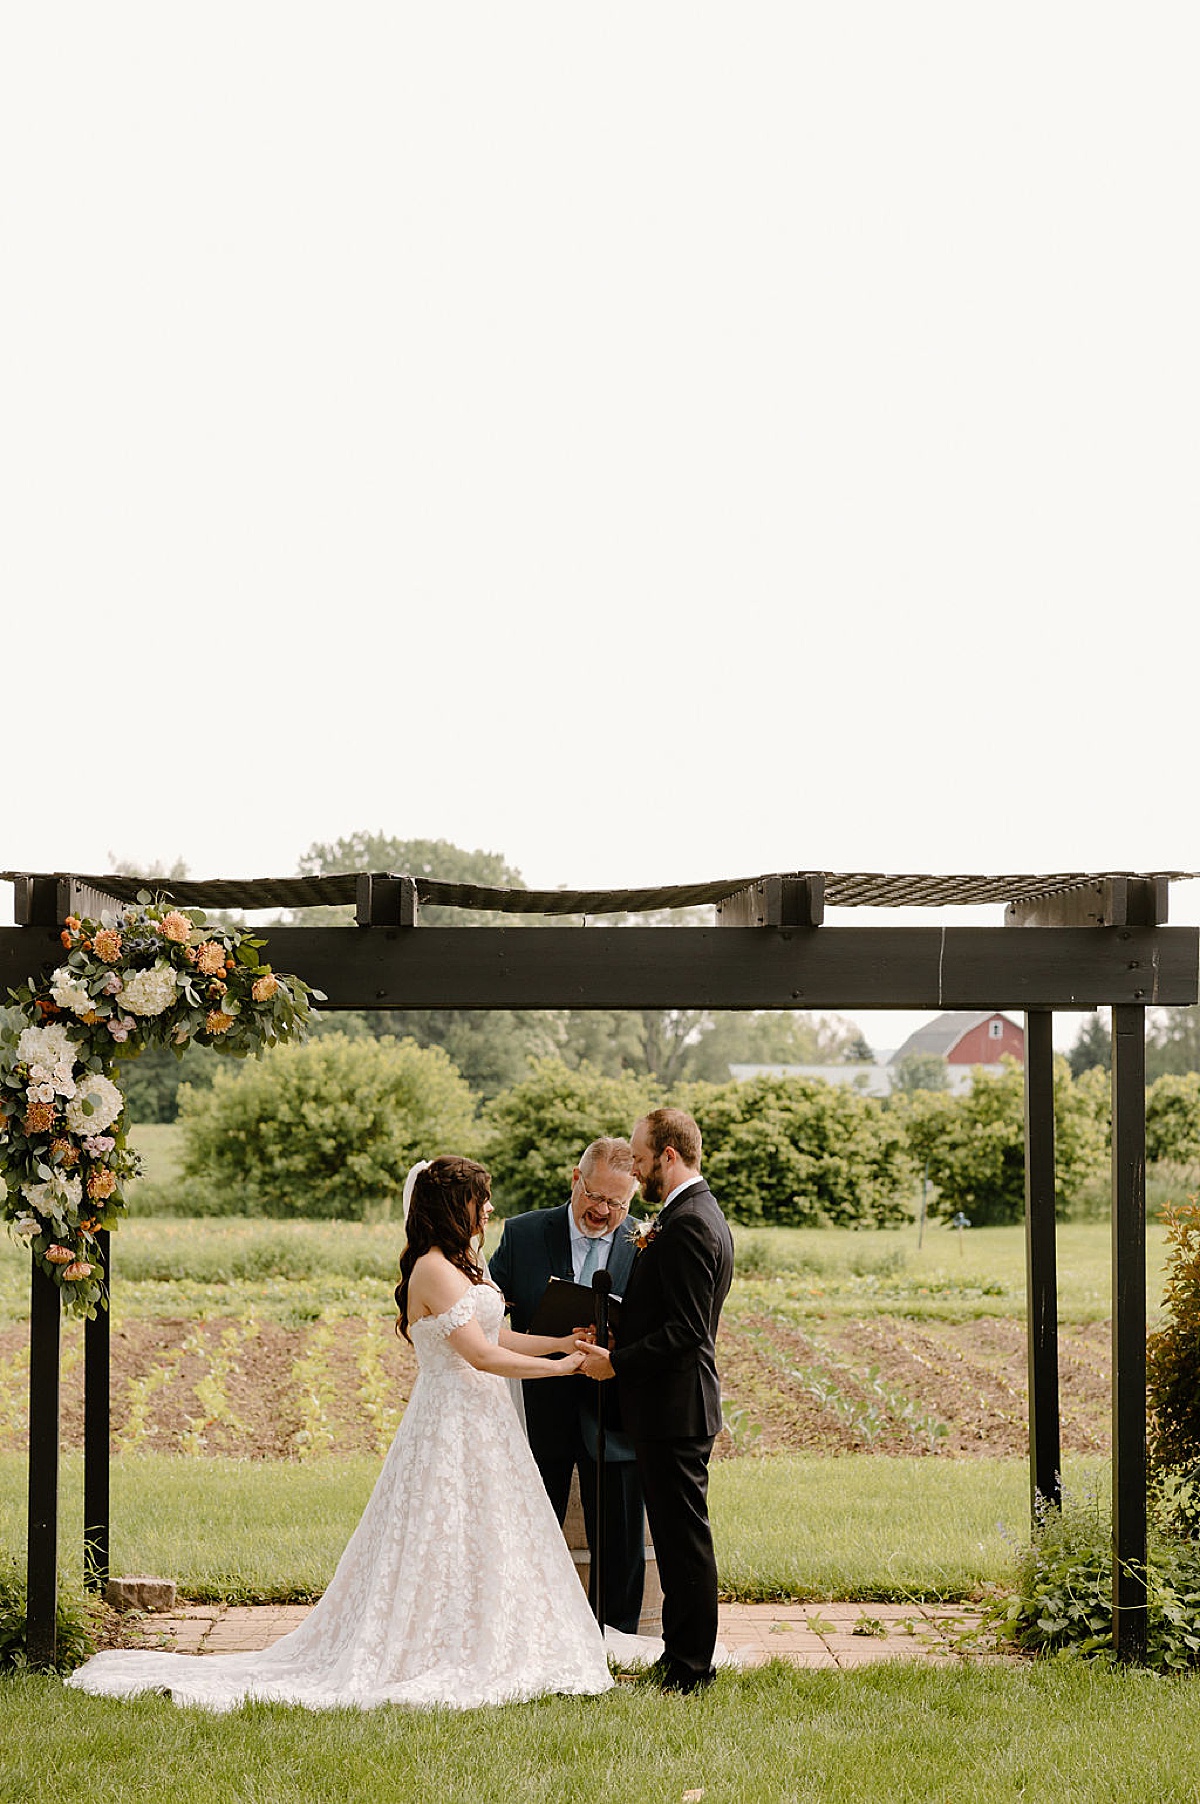 bride and groom share vows during wedding ceremony outdoors at illinois venue shot by indigo lace collective